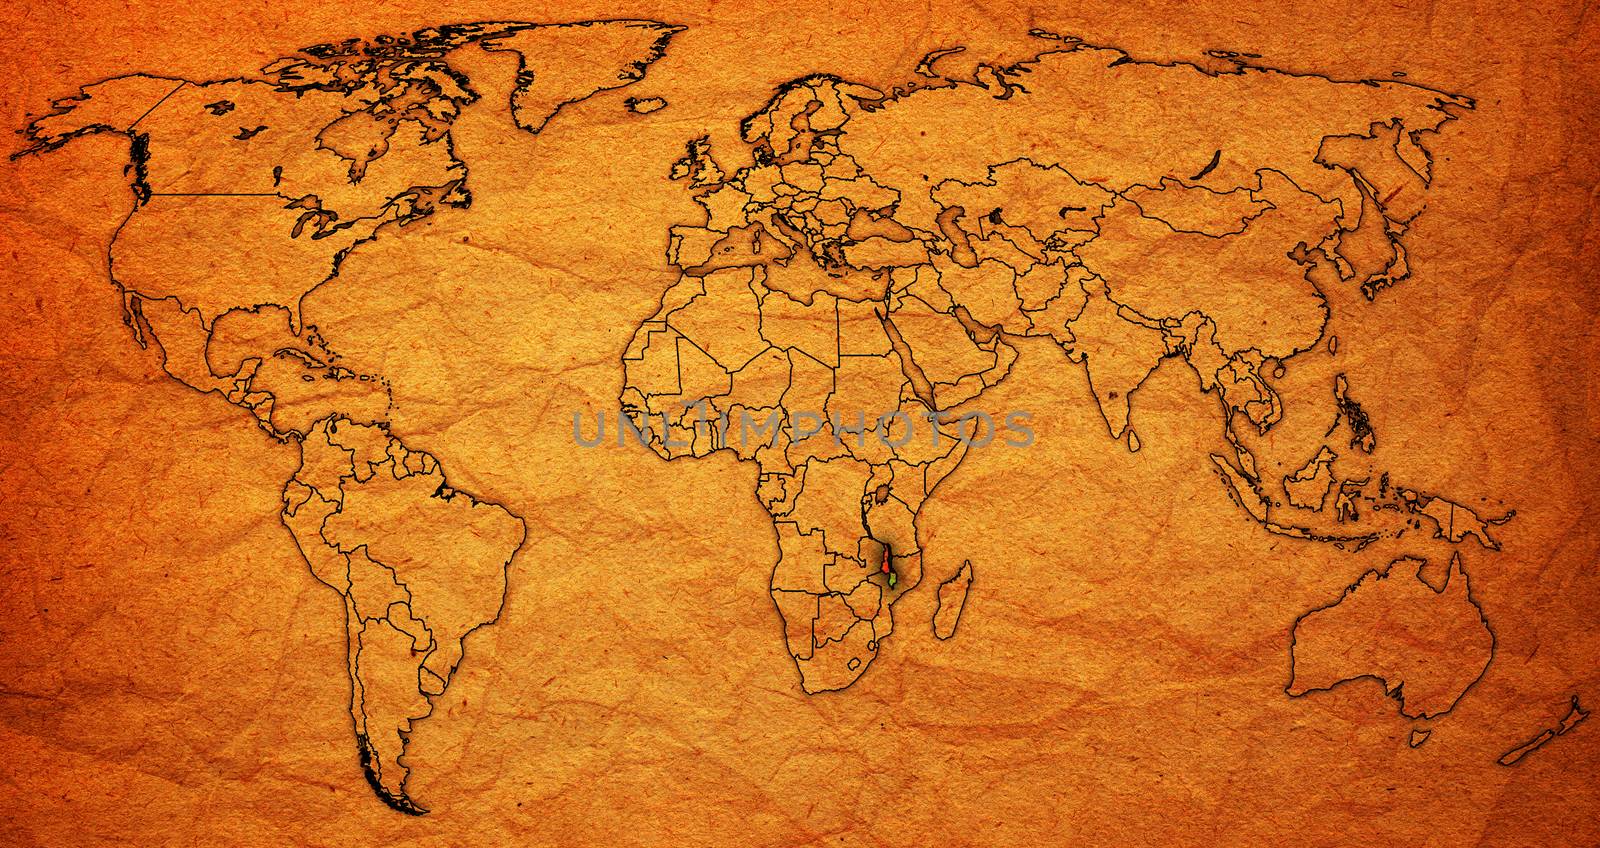 malawi territory on world map by michal812